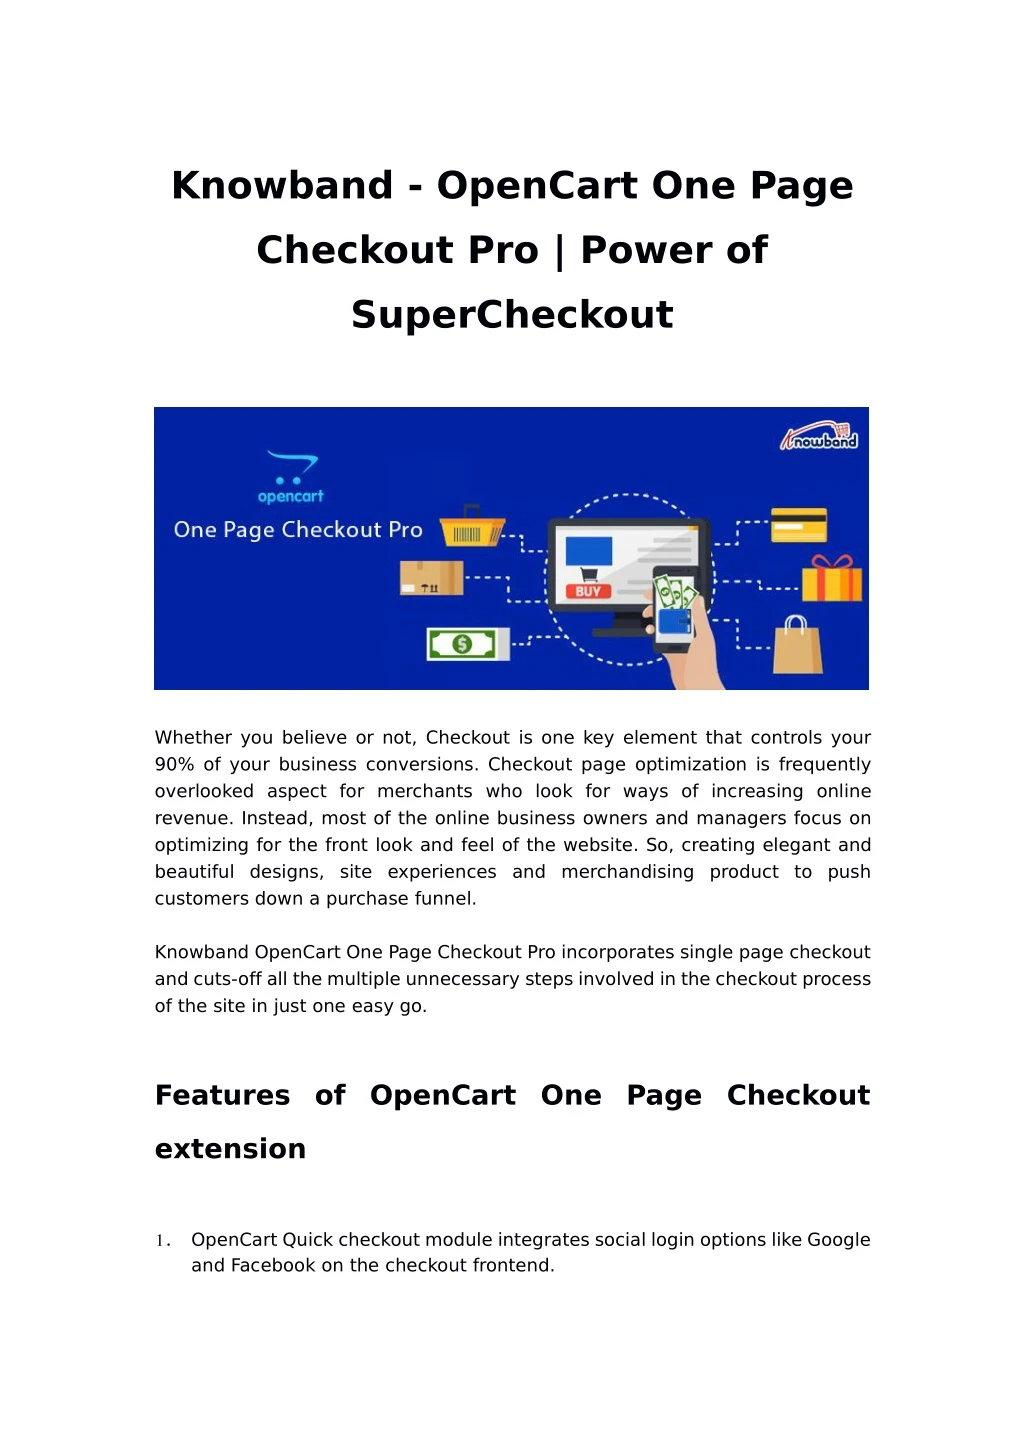 knowband opencart one page